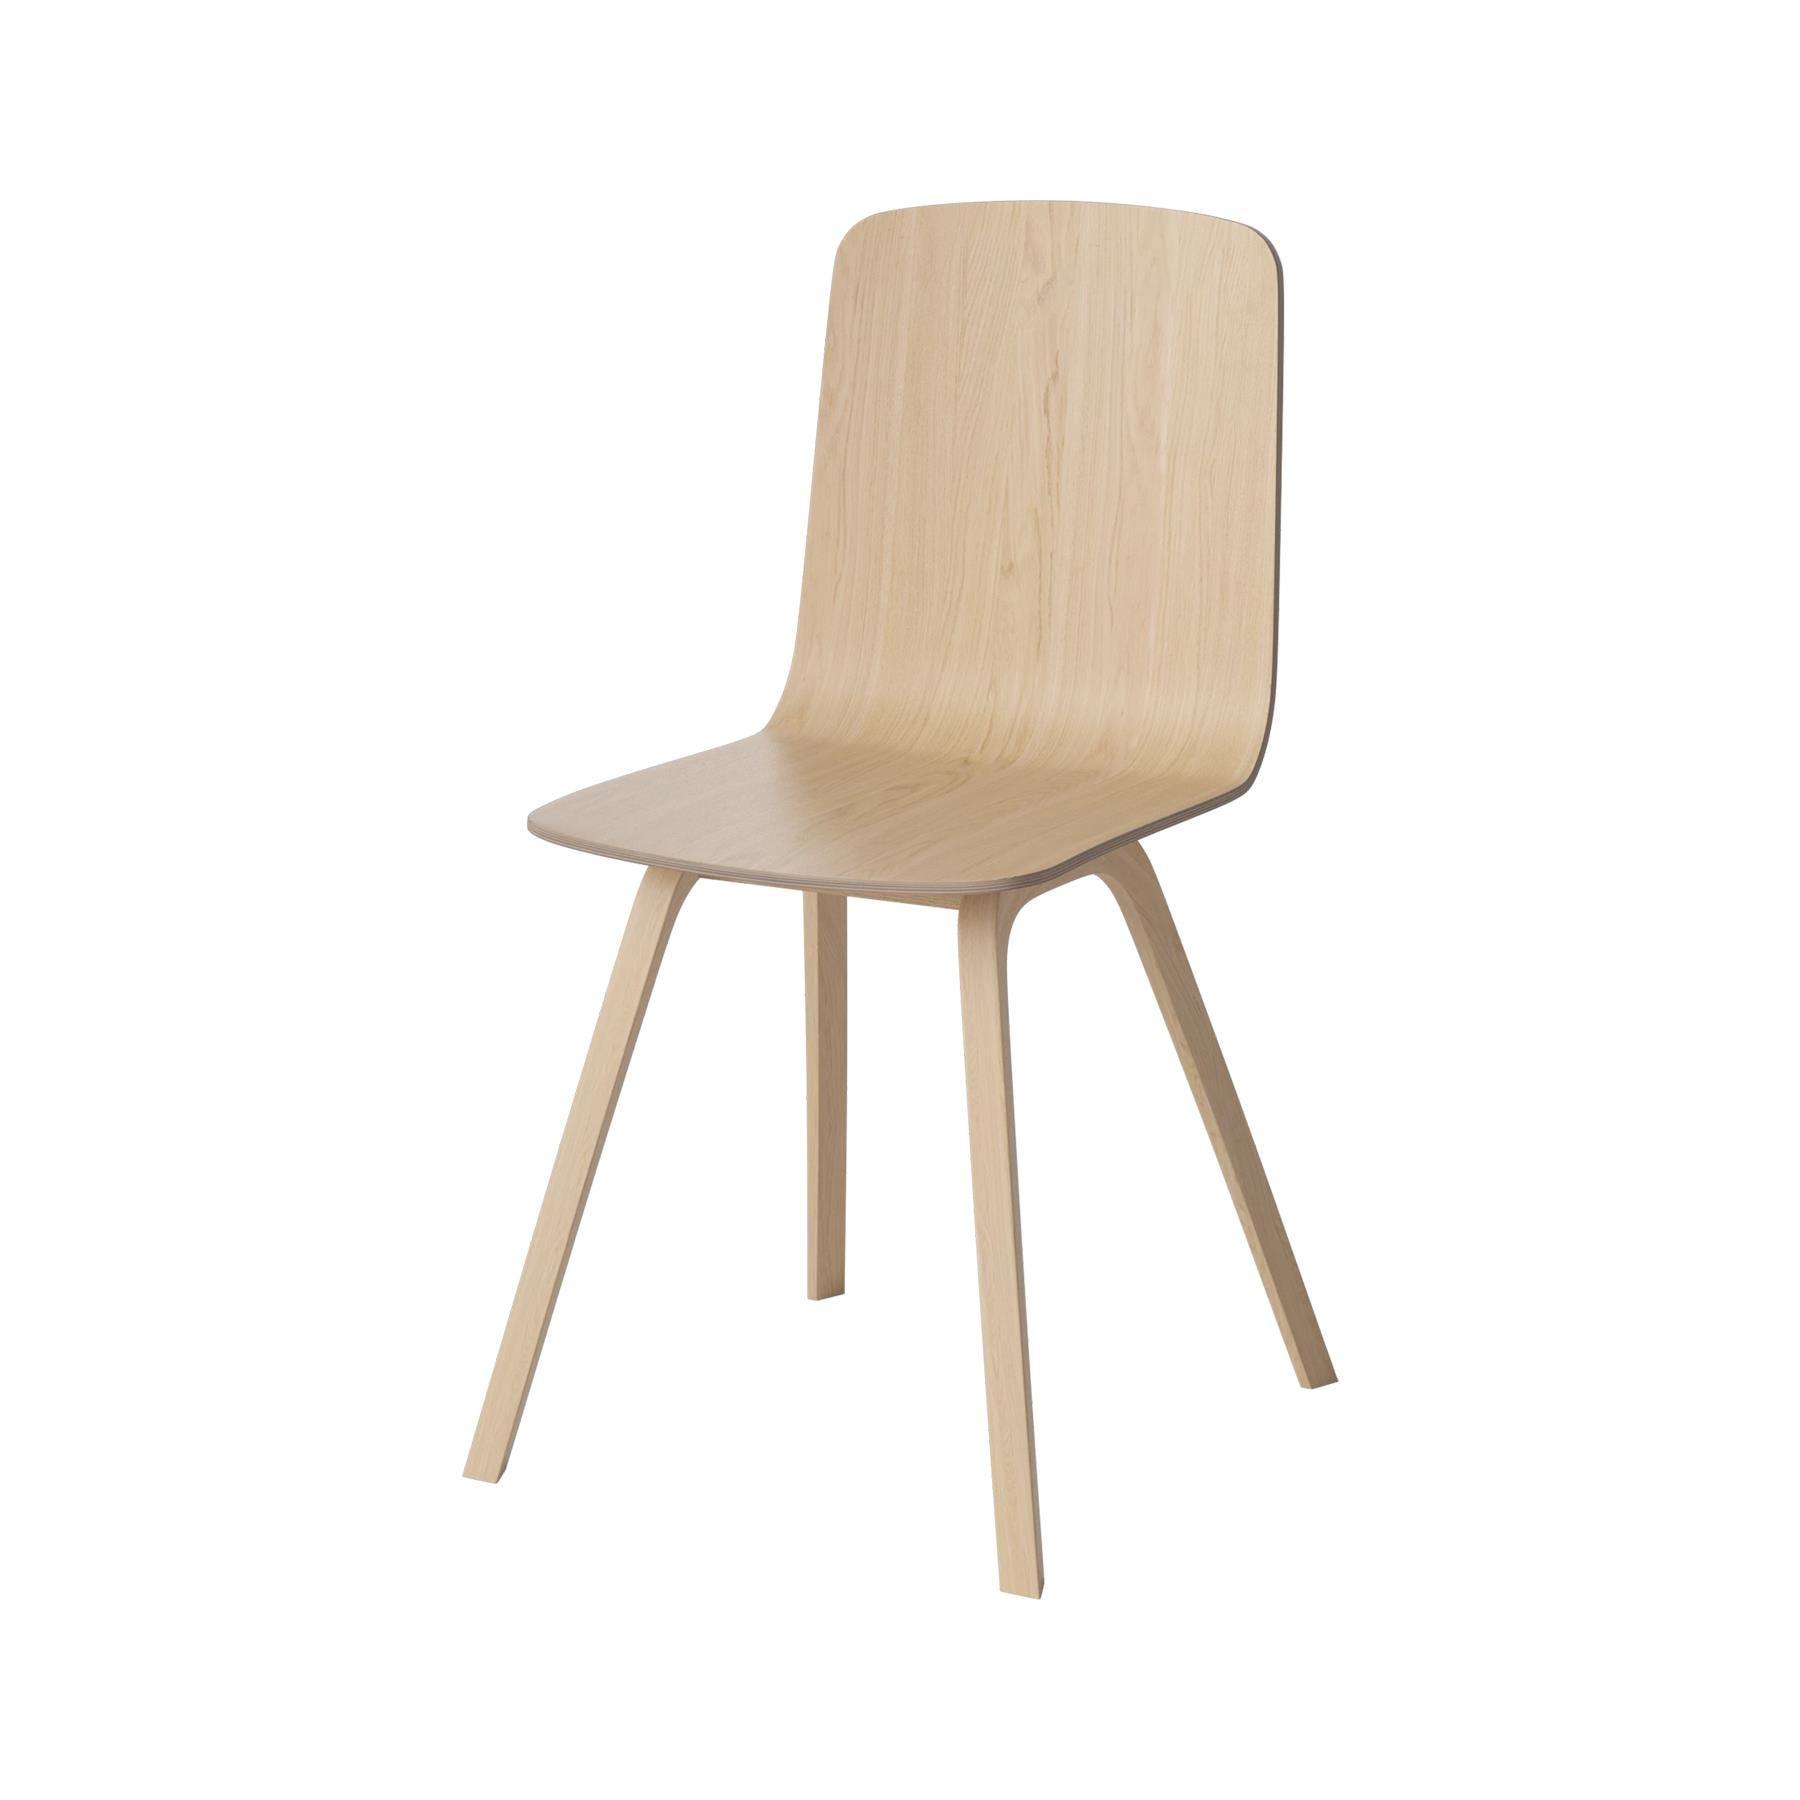 Bolia Palm Dining Chair Wood Veneer Legs White Oiled Oak Light Wood Designer Furniture From Holloways Of Ludlow